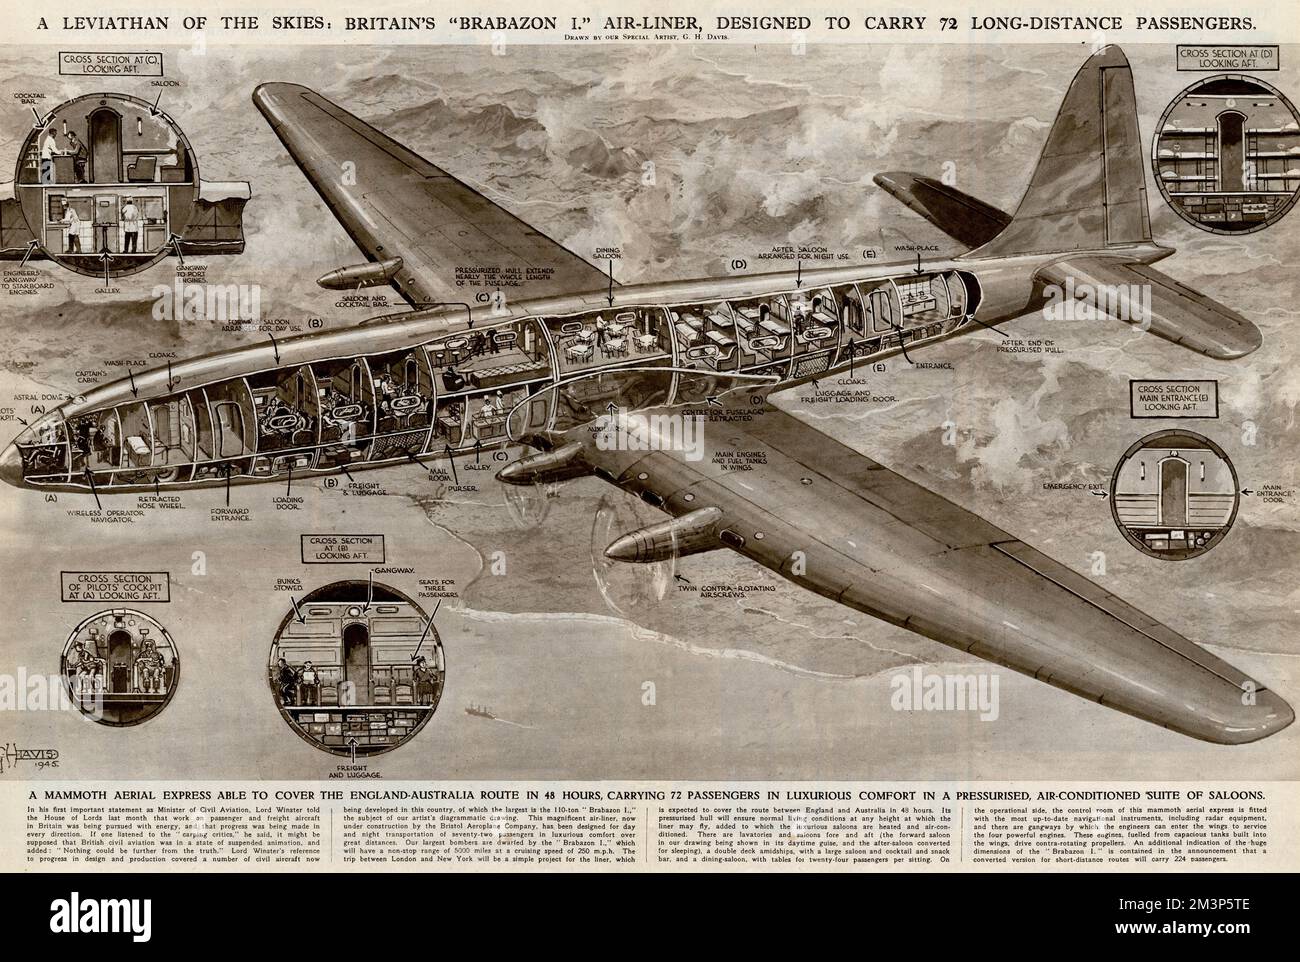 A Leviathan of the skies: Britain's Brabazon I airliner, designed to carry 72 long-distance passengers.  A mammoth aerial express able to cover the England-Australia route in 48 hours, carrying 72 passengers in luxurious comfort in a pressurised, air-conditioned suite of saloons. Stock Photo